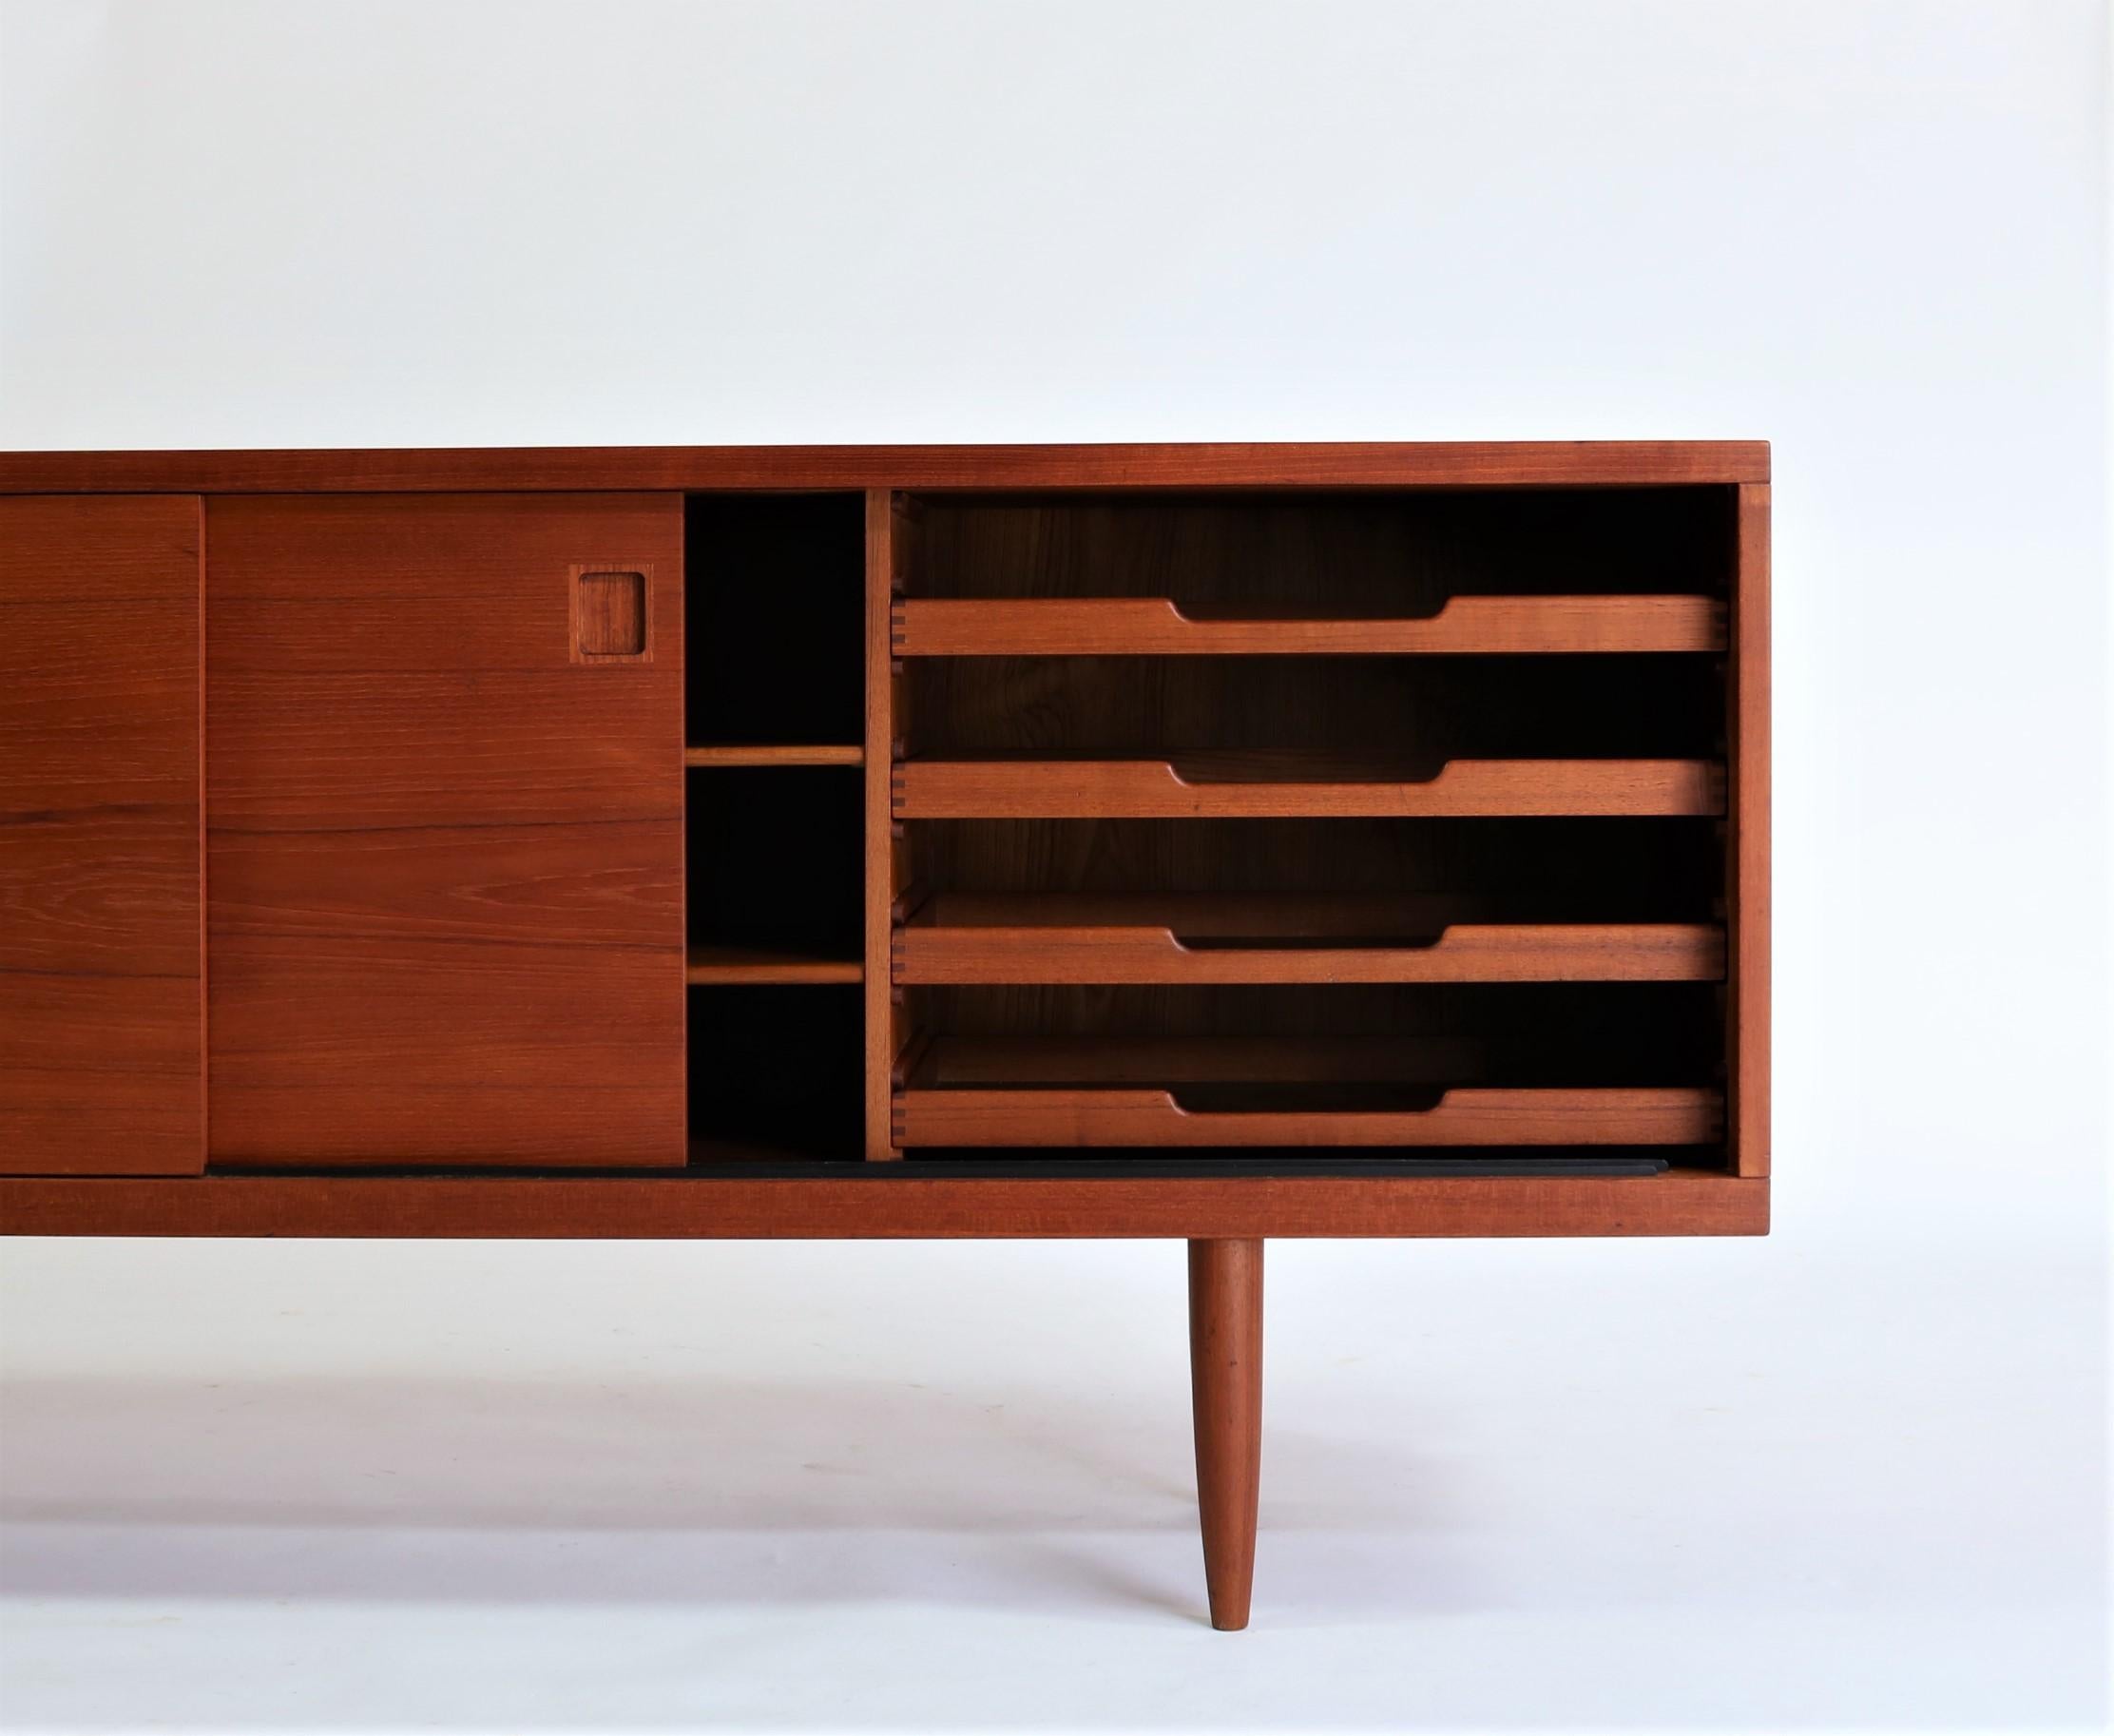 Stunning 1960s furniture design by Niels Otto Moller. Low sideboard/credenza in simplistic design with nice details like the beautifully carved edges on the top and the finger joints on the solid teak drawers. The interior is fully made out of teak